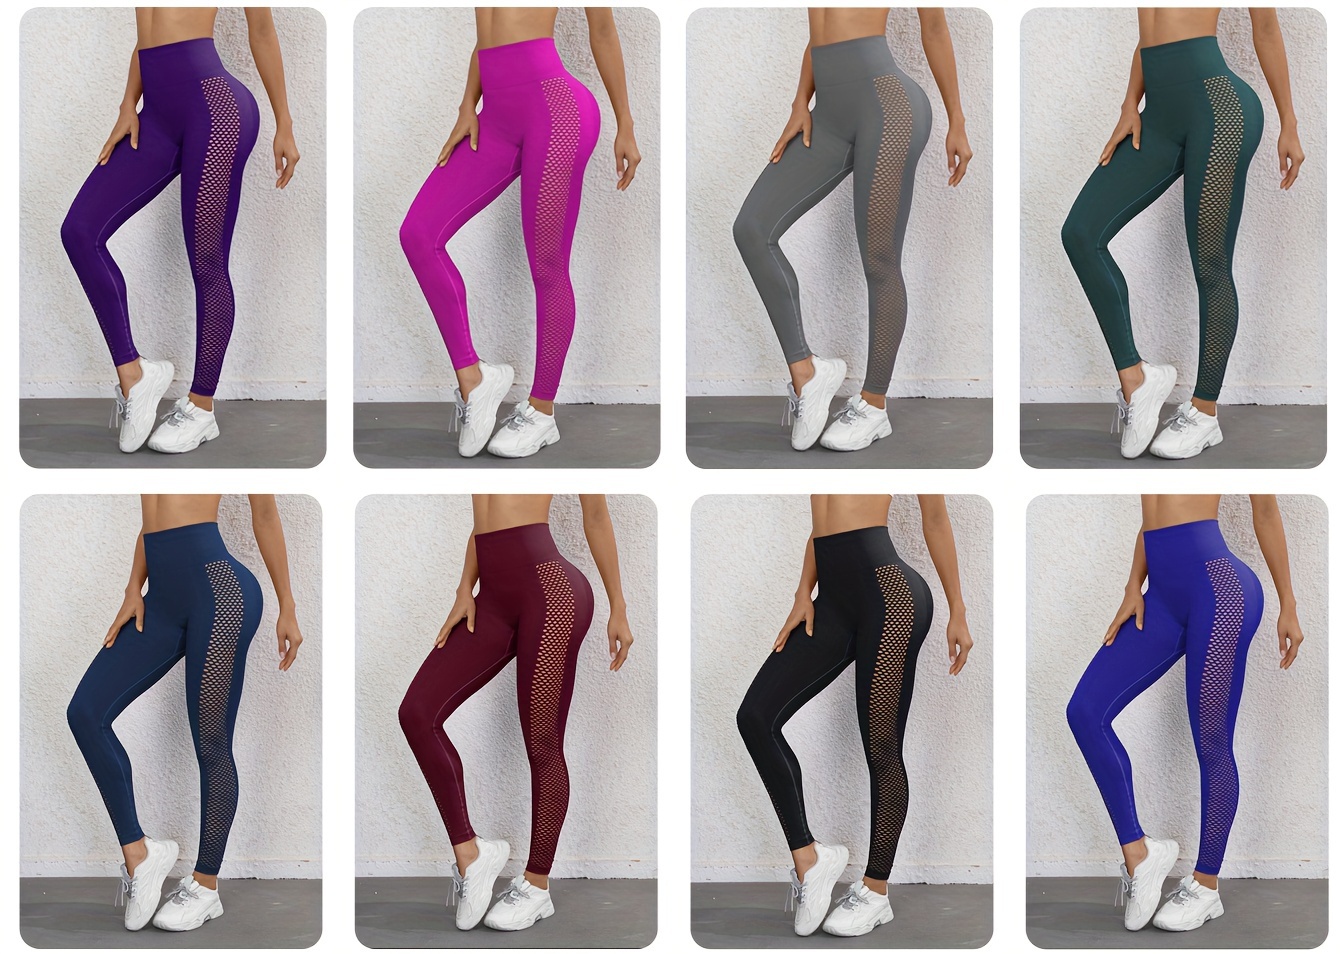 Breathable Candy Colored Shark Sports Direct Leggings For Girls Elastic Sport  Legging With Side Pockets, Ideal For Yoga, Gym And Fitness Wear In Summer  From Angelgirlshe111, $16.19